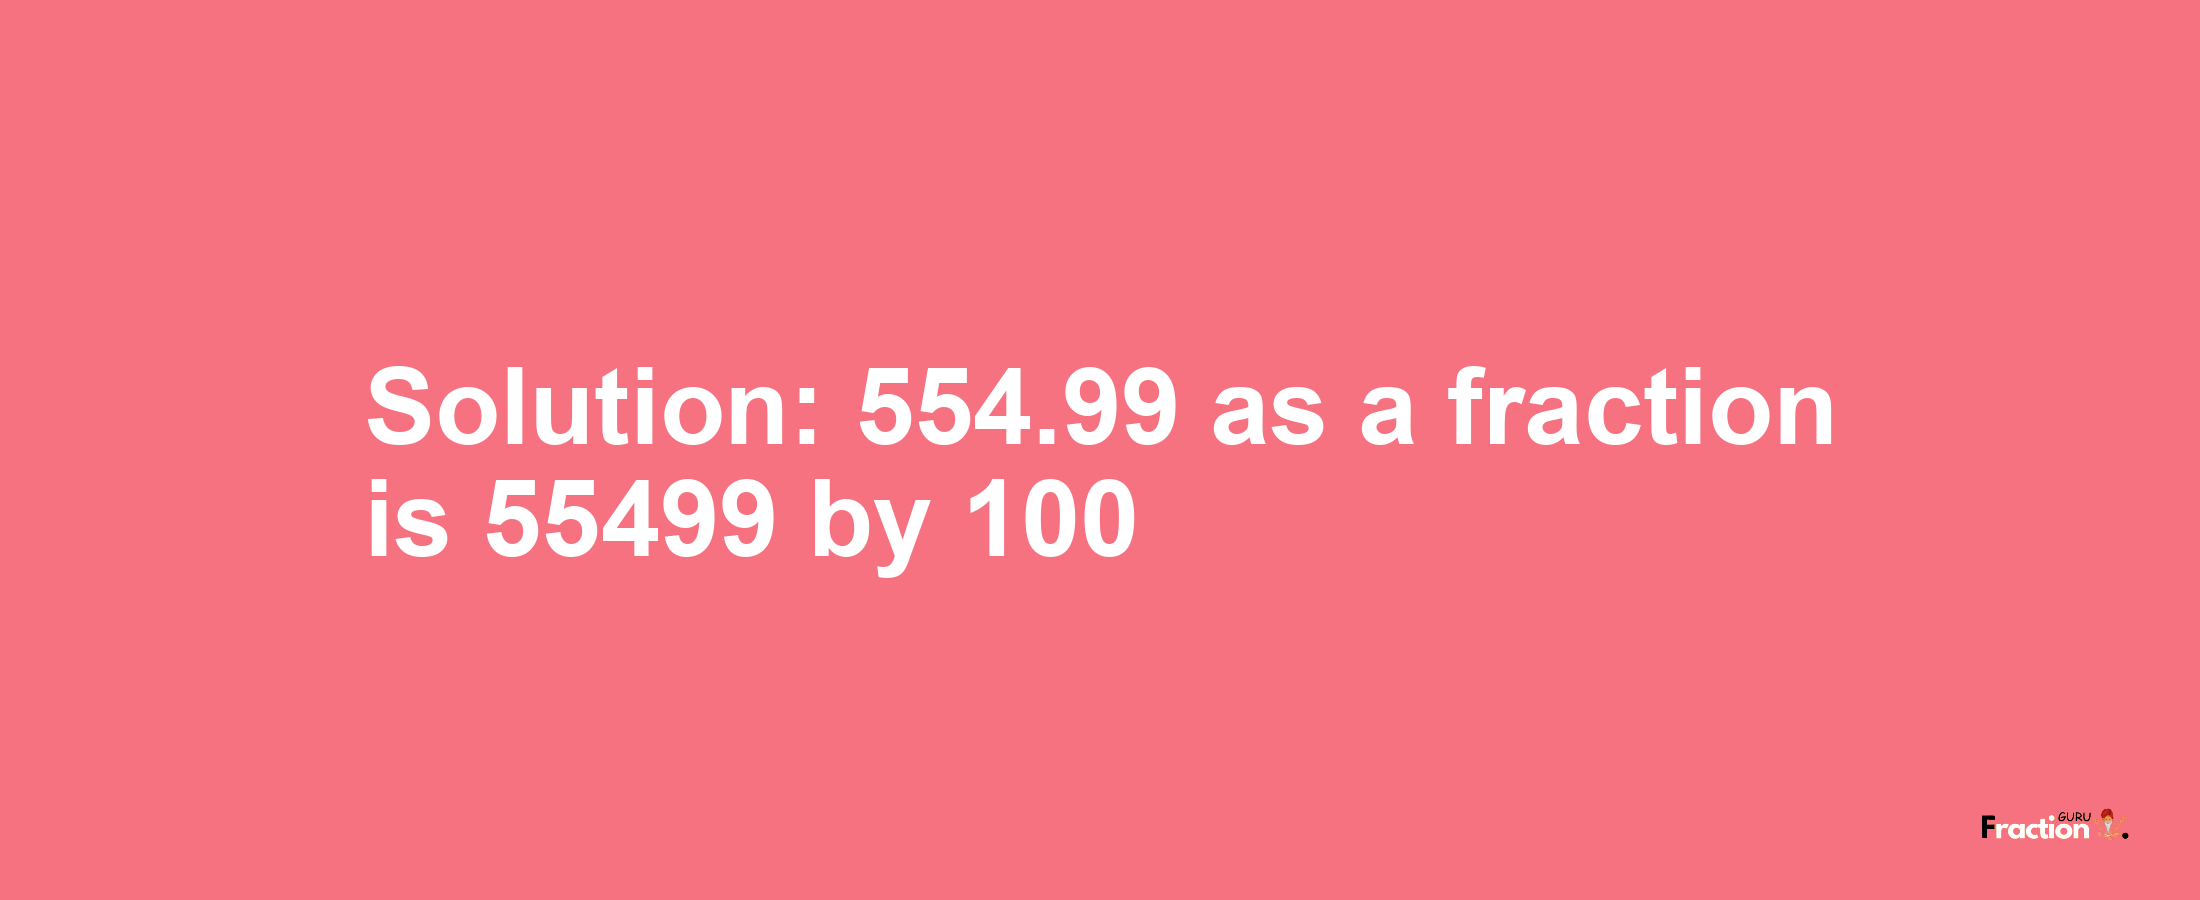 Solution:554.99 as a fraction is 55499/100